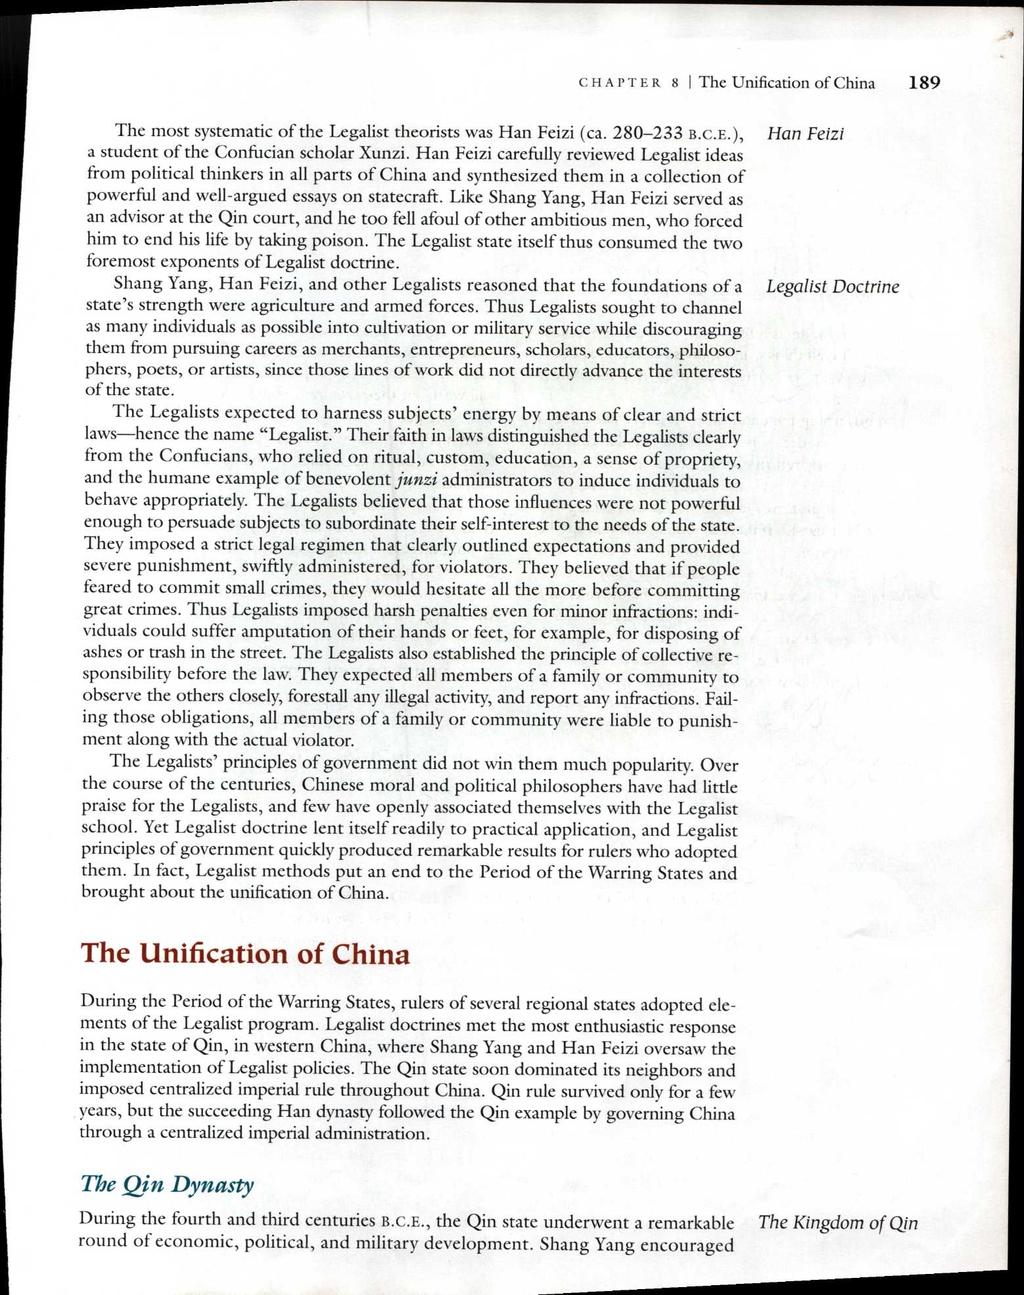 CHAPTER 8 I The Unification of China 189 The most systematic of the Legalist theorists was Han Feizi (ca. 280-233 B.c.E.), a student of the Confucian scholar Xunzi.